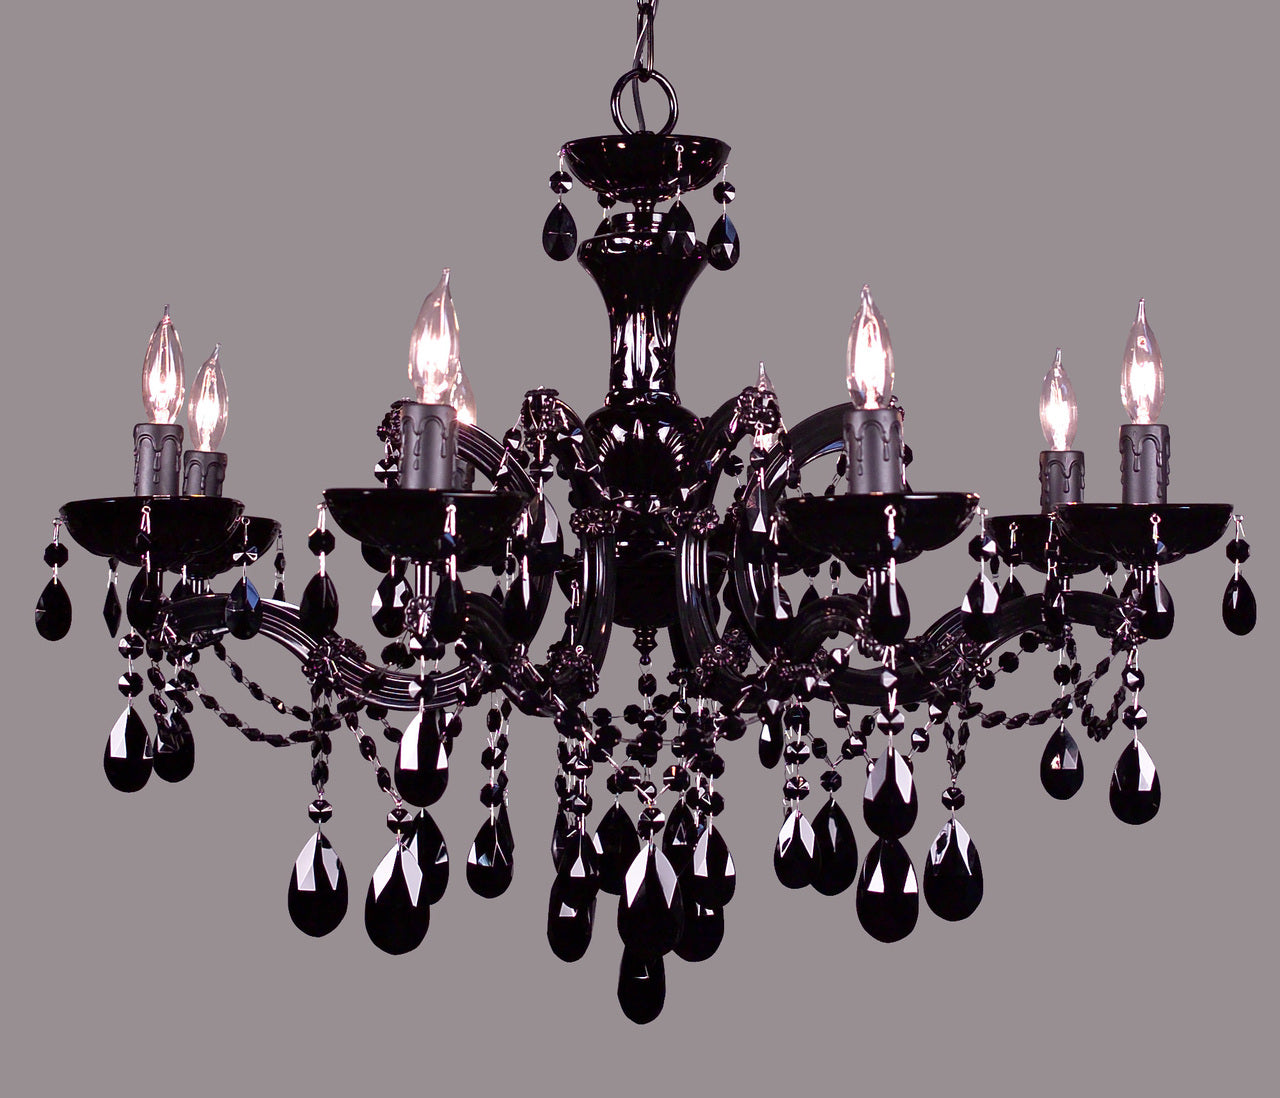 Classic Lighting 8348 BBLK SJT Rialto Traditional Crystal Chandelier in Black